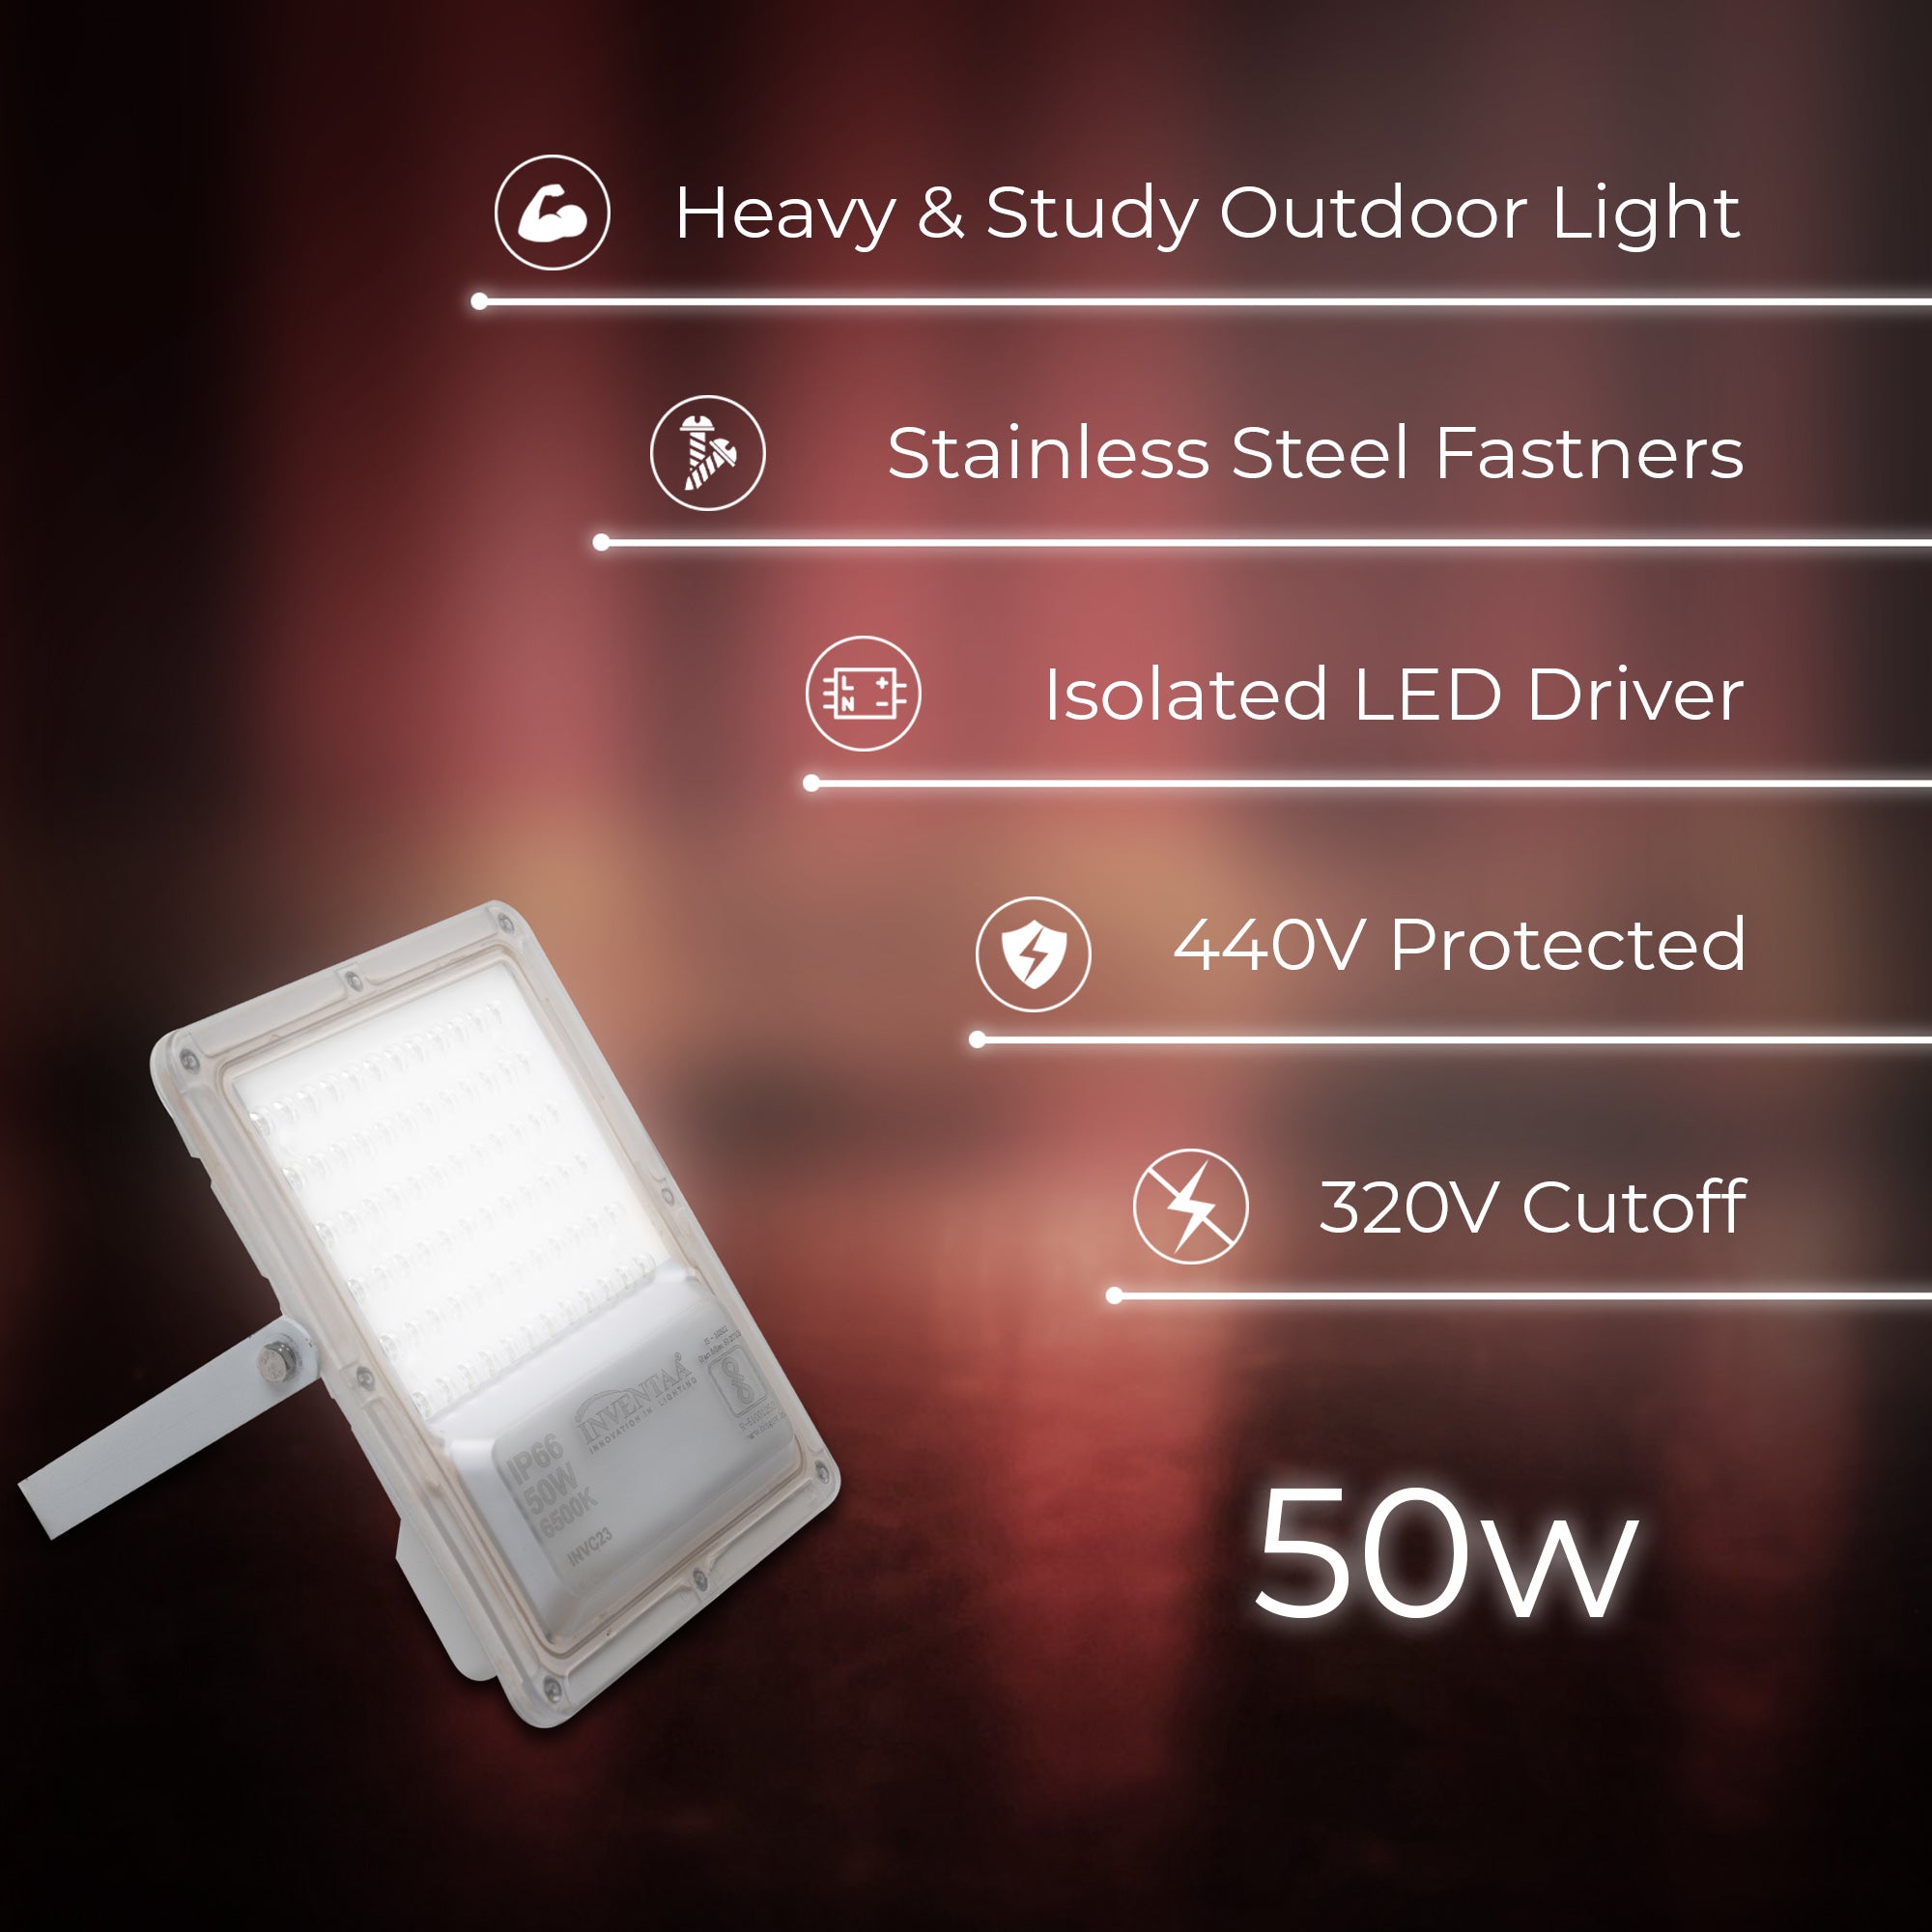 Specifications of Lancia 50W led focus light #watts_50w